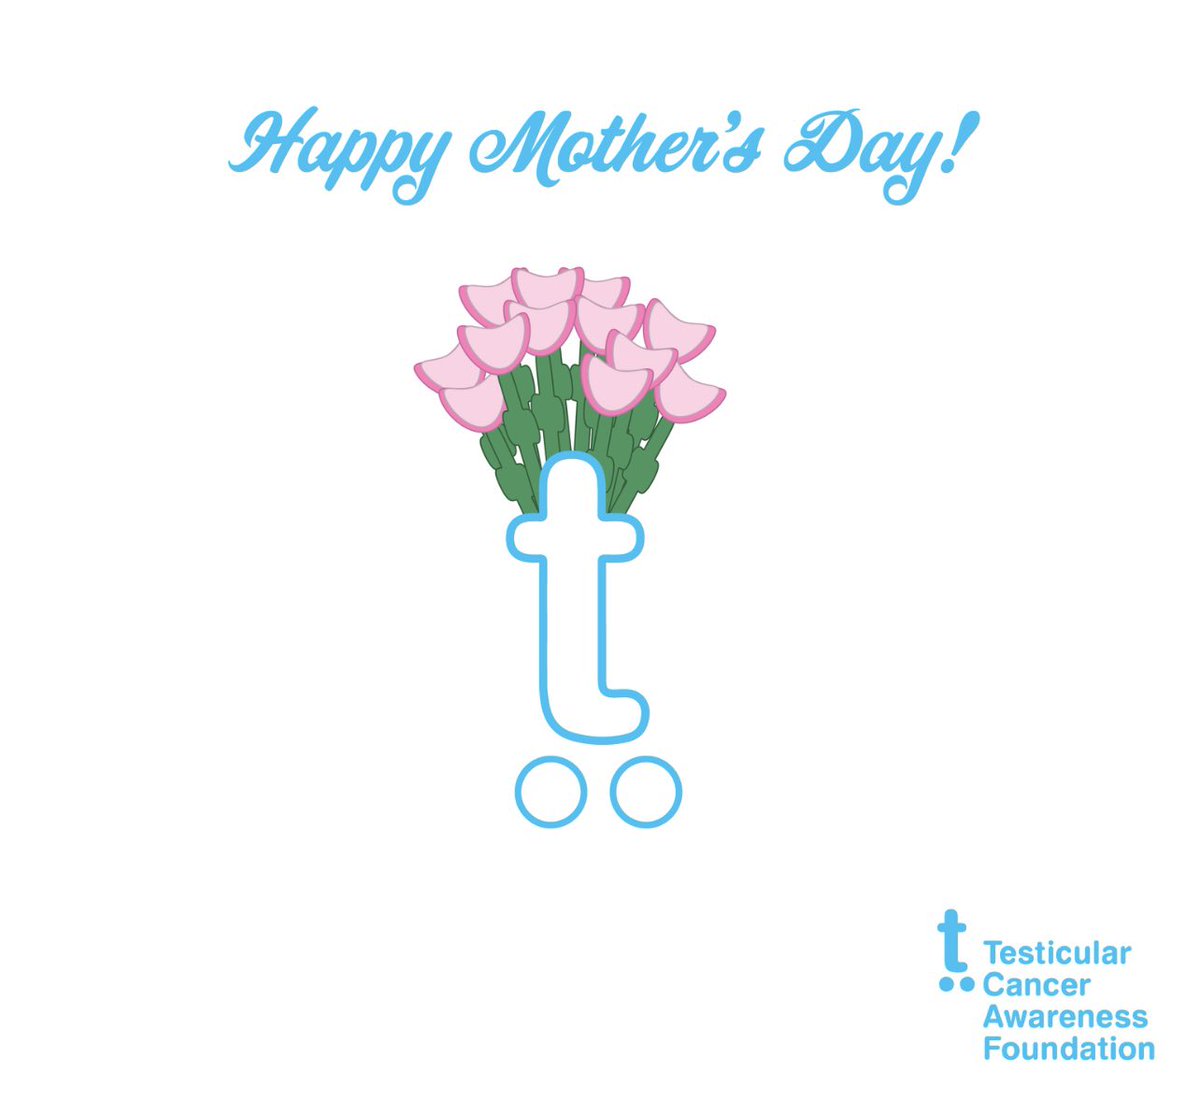 To all the mothers who fill our lives with love, strength, and endless support, Happy Mother’s Day! You are our guiding light and source of inspiration. Have a blessed day from all of us at the Testicular Cancer Awareness Foundation. #testicularcancer #urology #mothersday